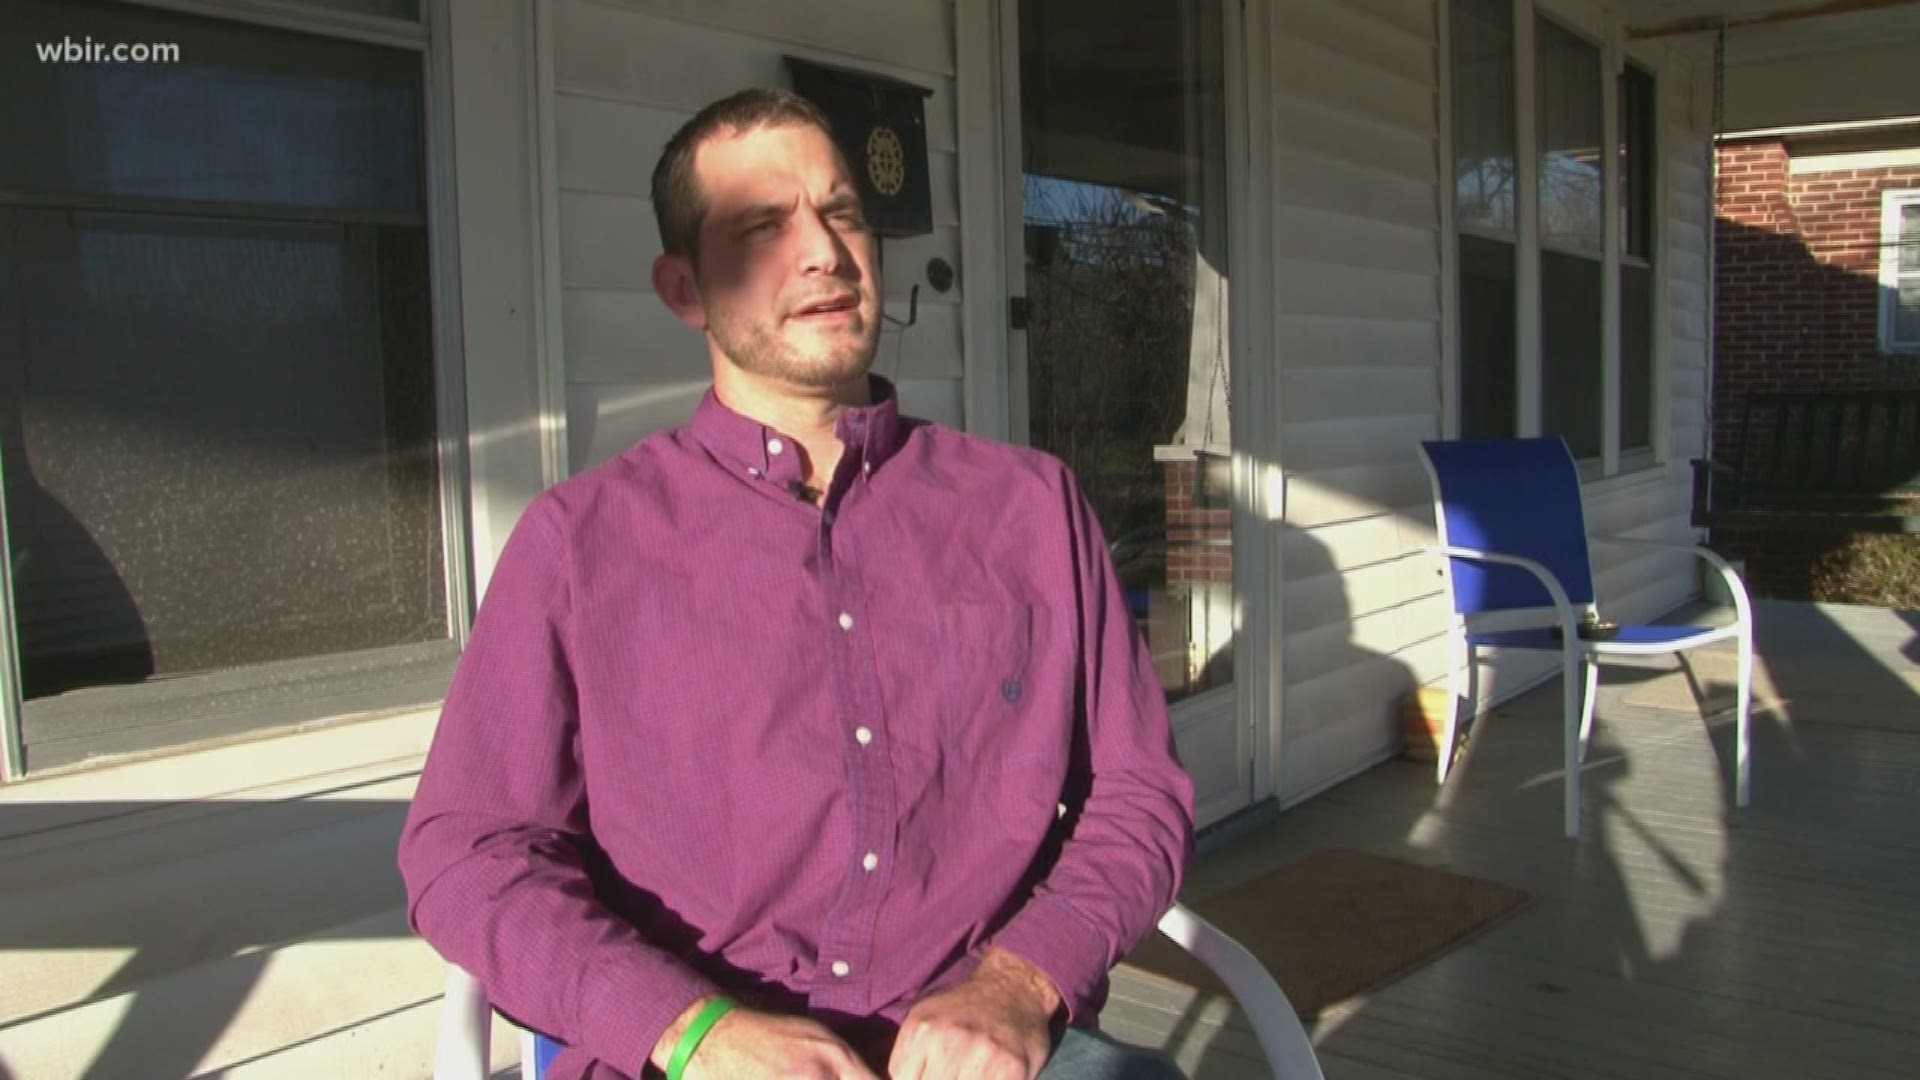 Jan. 25, 2018: A Knoxville man is alive thanks to the life-saving drug Narcan. He now wants people to turn away from the stigma and realize a life is worth saving no matter what.